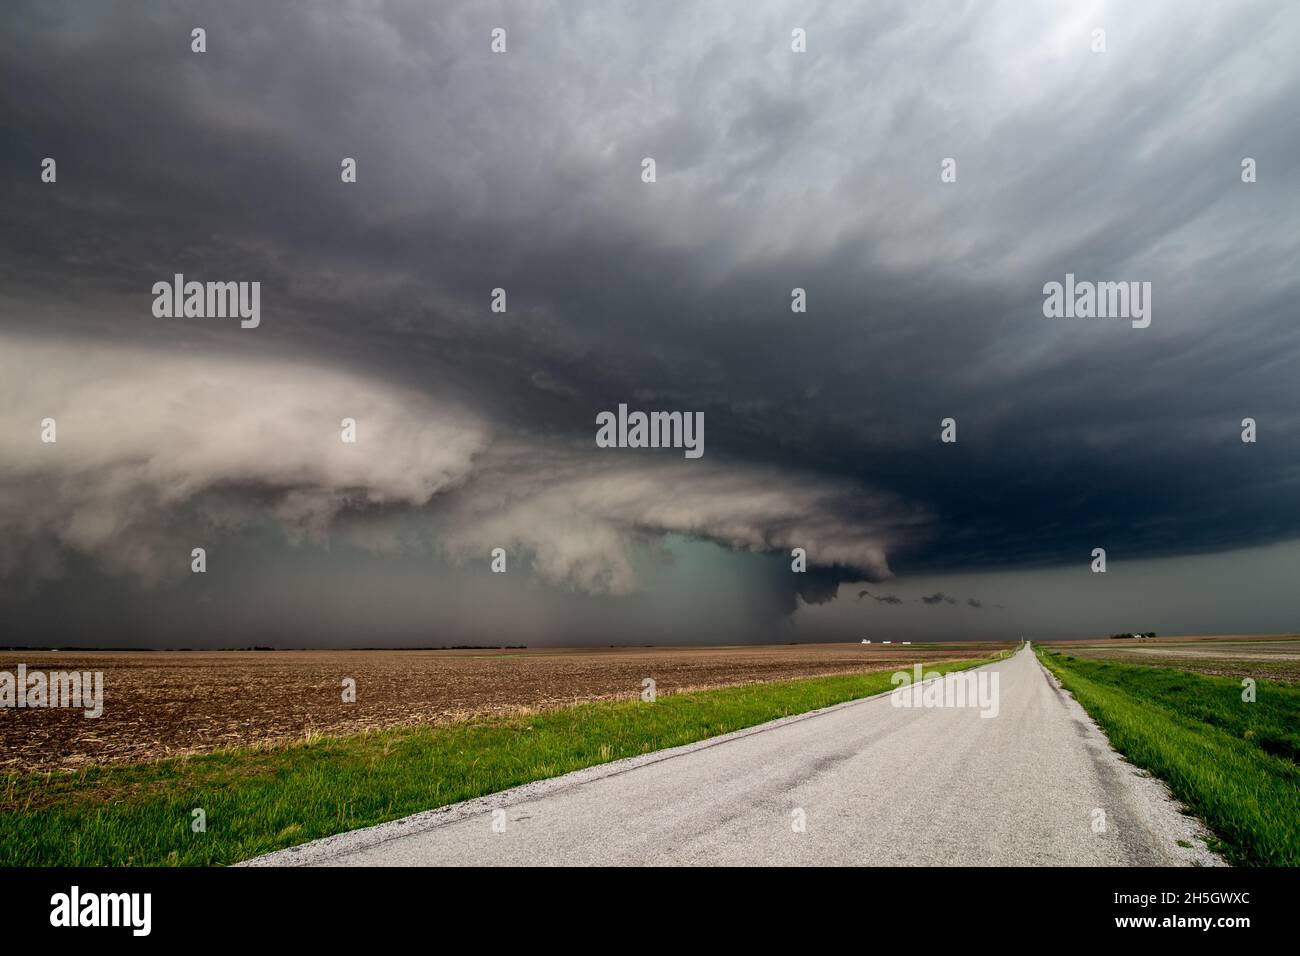 Dangerous storm with shelf cloud approaches quickly over a farm field along a country road. Stock Photo